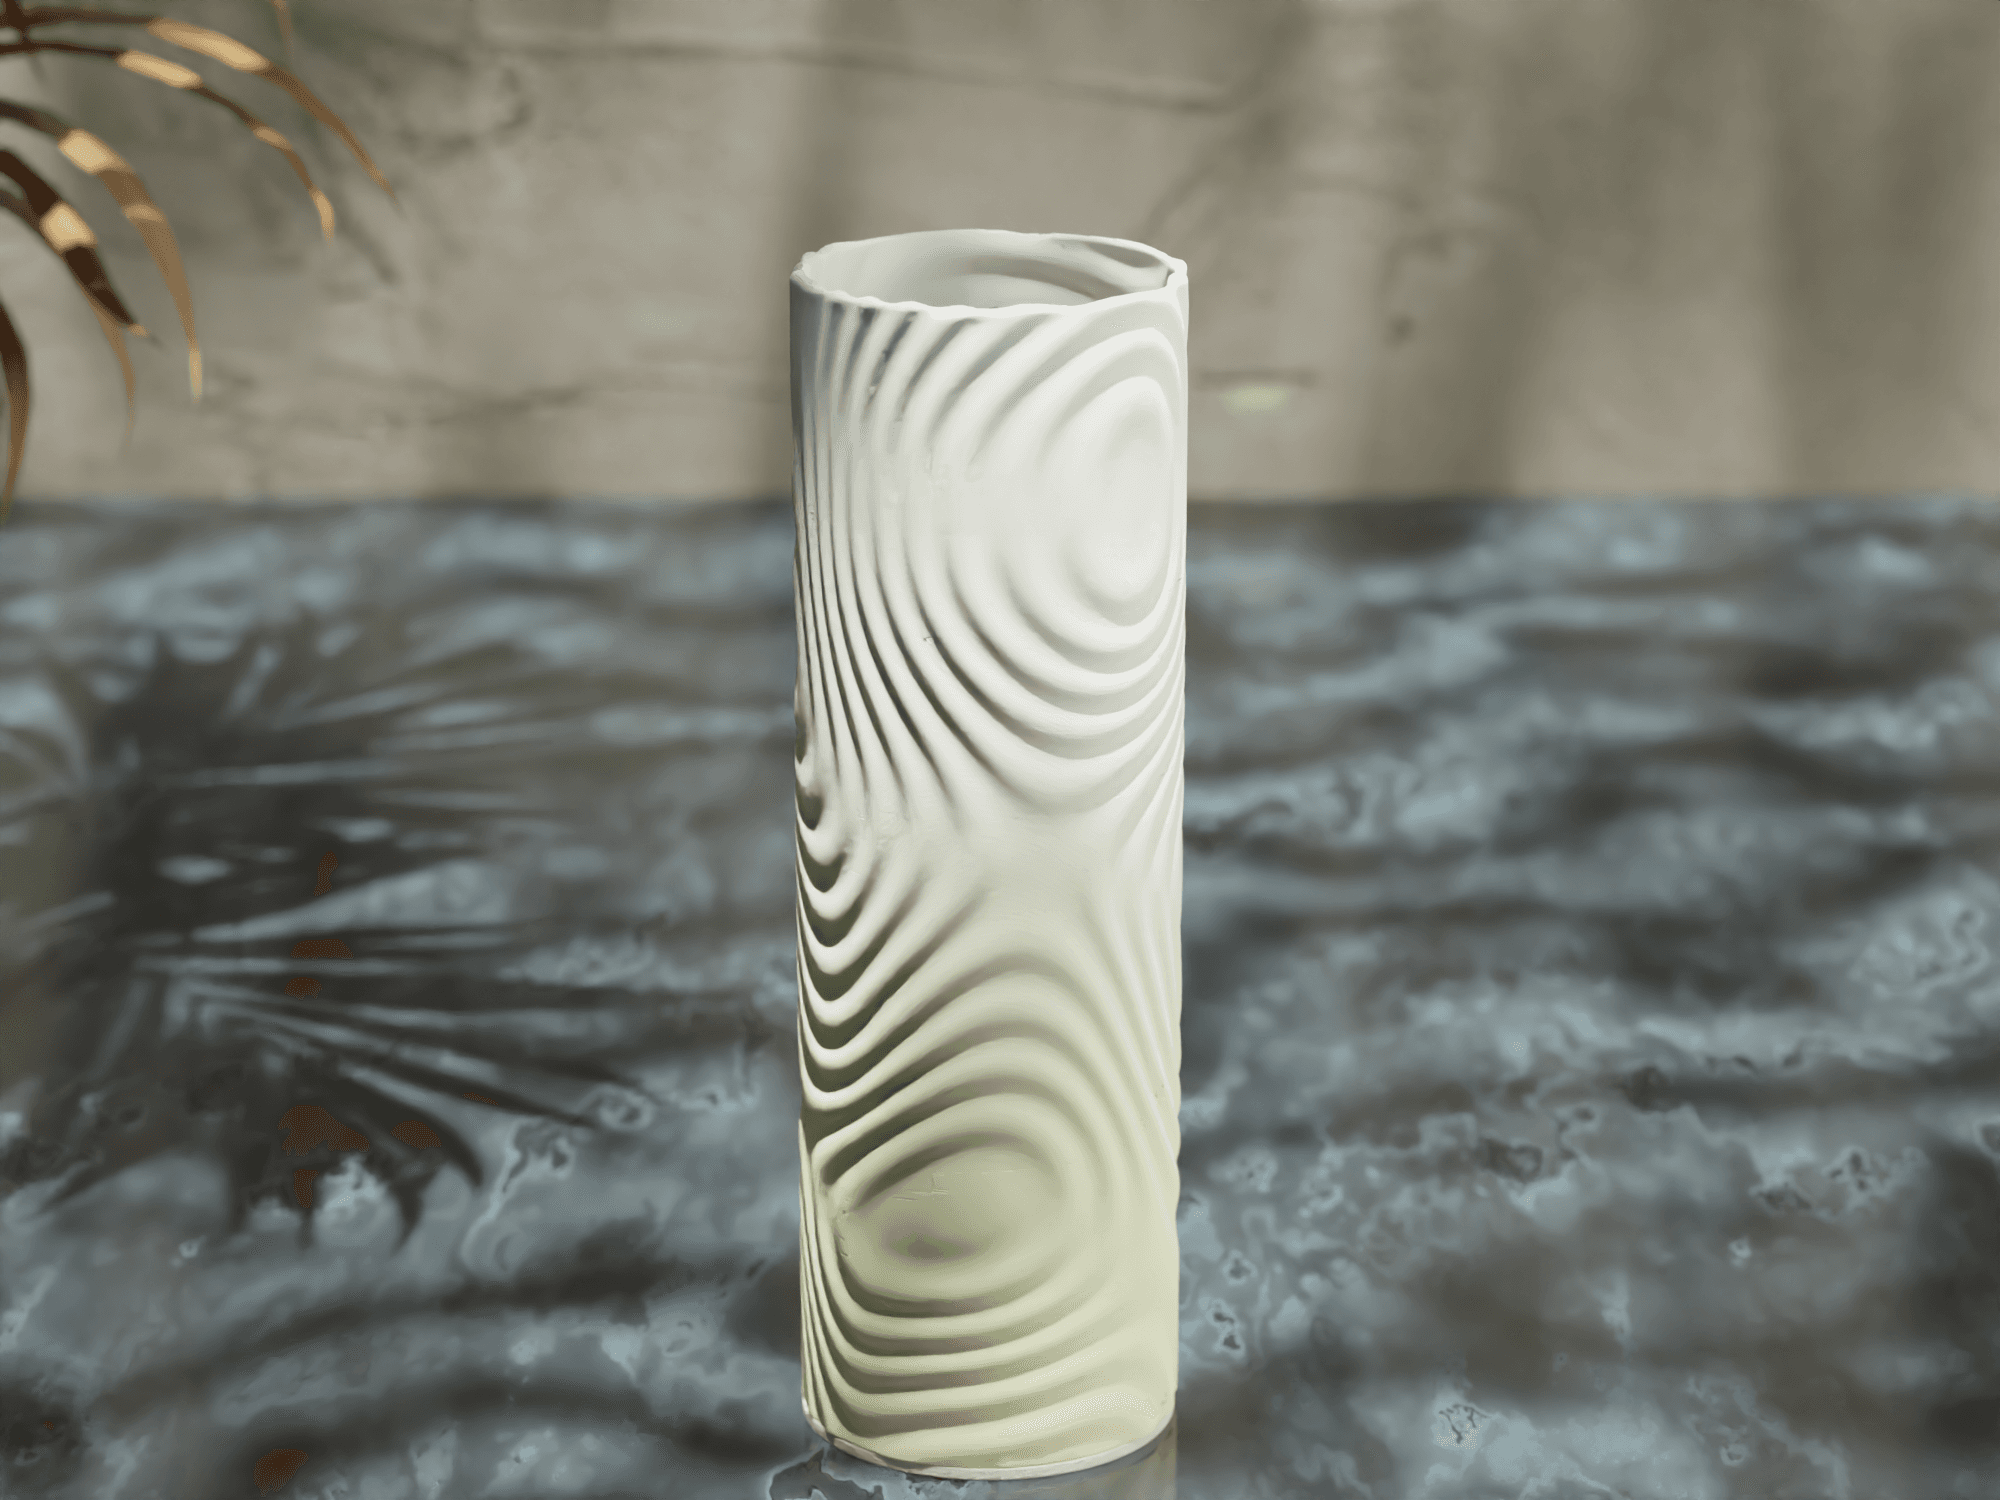 Waveform Incense Holder: A Minimalist Accent for Your Space 3d model